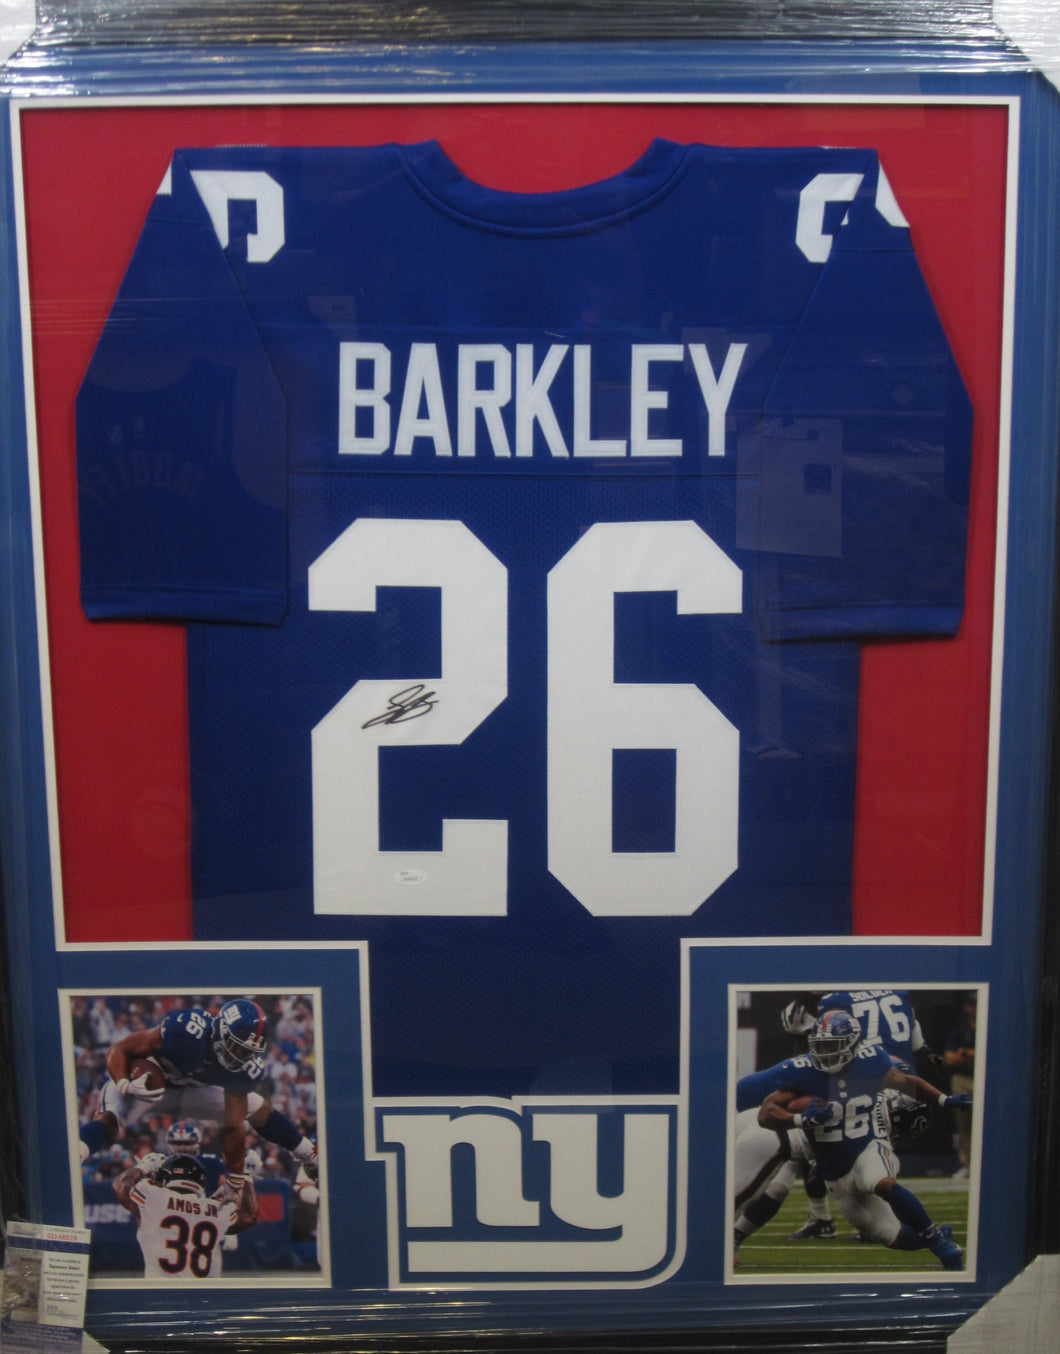 New York Giants Saquon Barkley Signed Jersey Framed & Matted with JSA COA